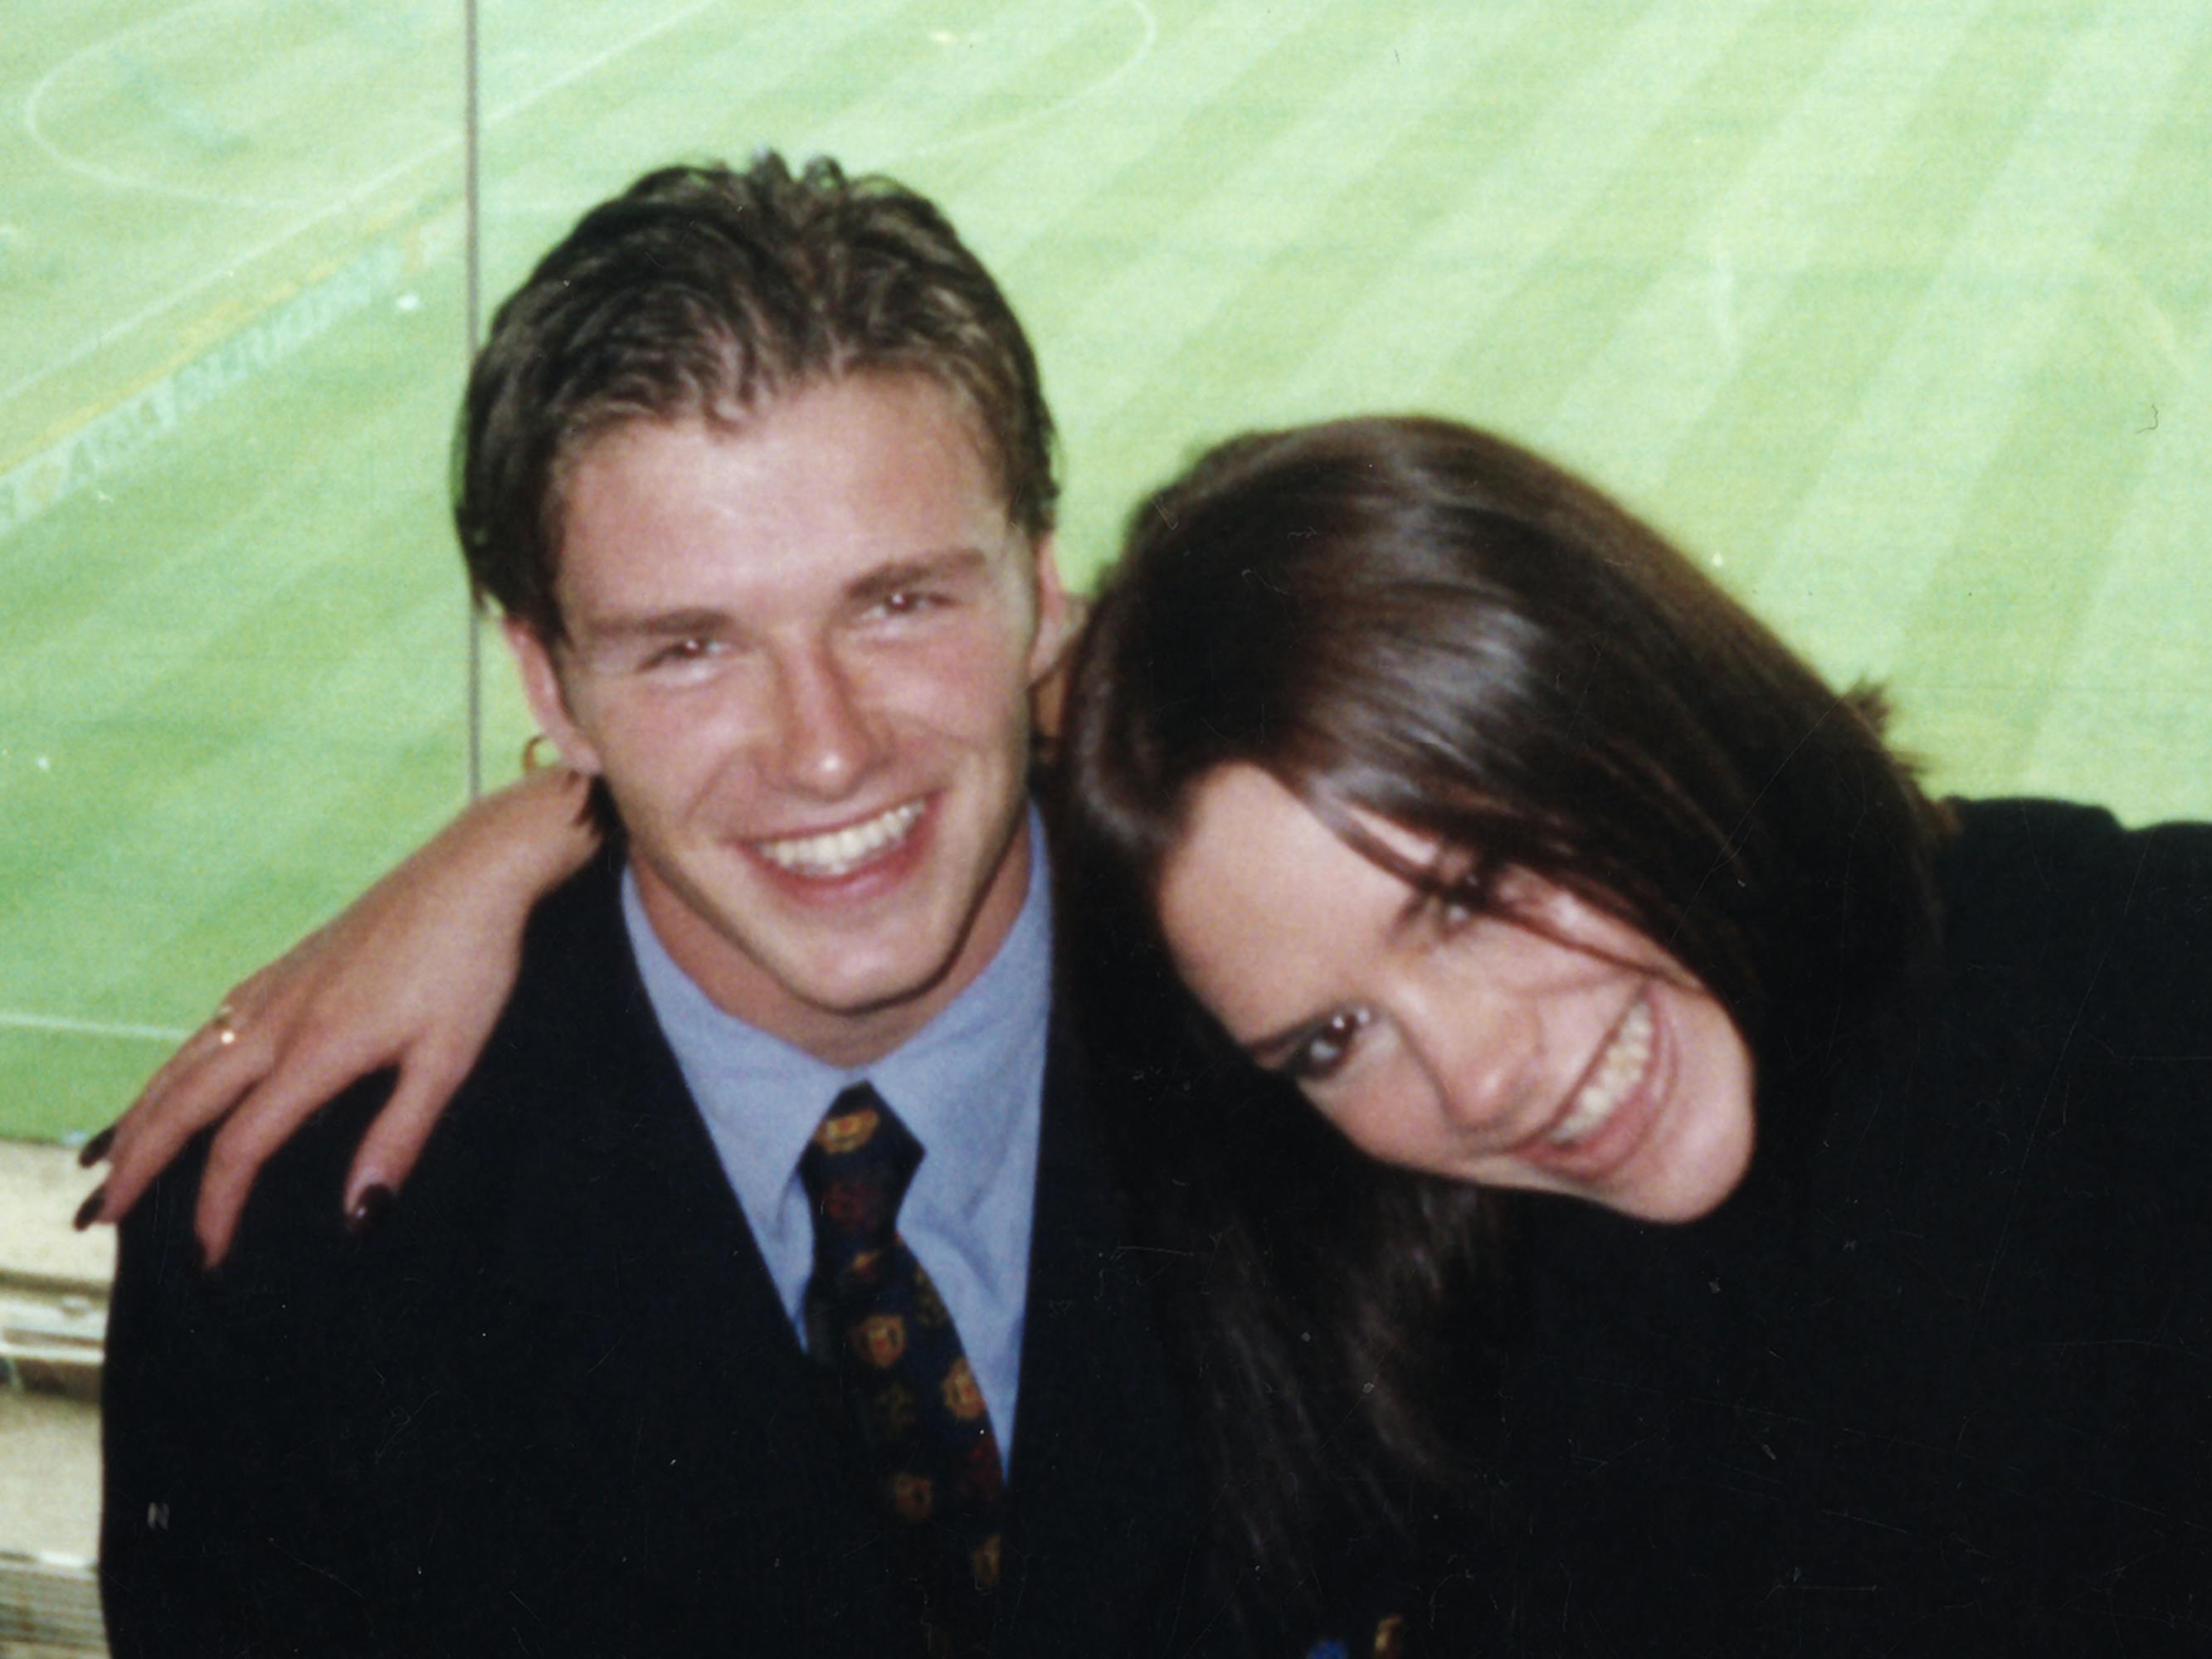 David and Victoria Beckham pose together by an empty soccer pitch. What a good-looking couple!